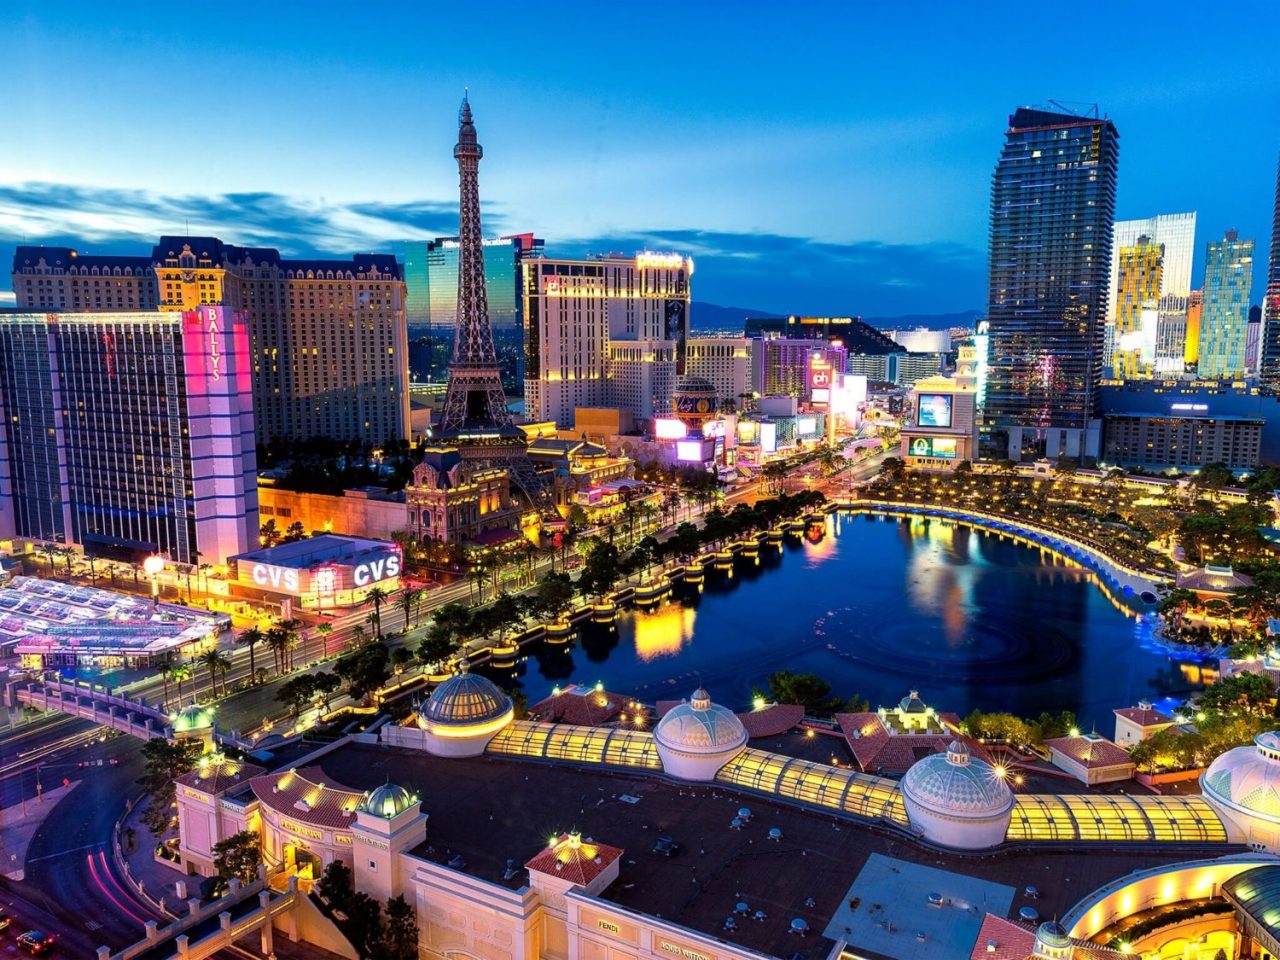 Marketing Lessons from the Las Vegas Strip - A Q&A With Ryan Thompson